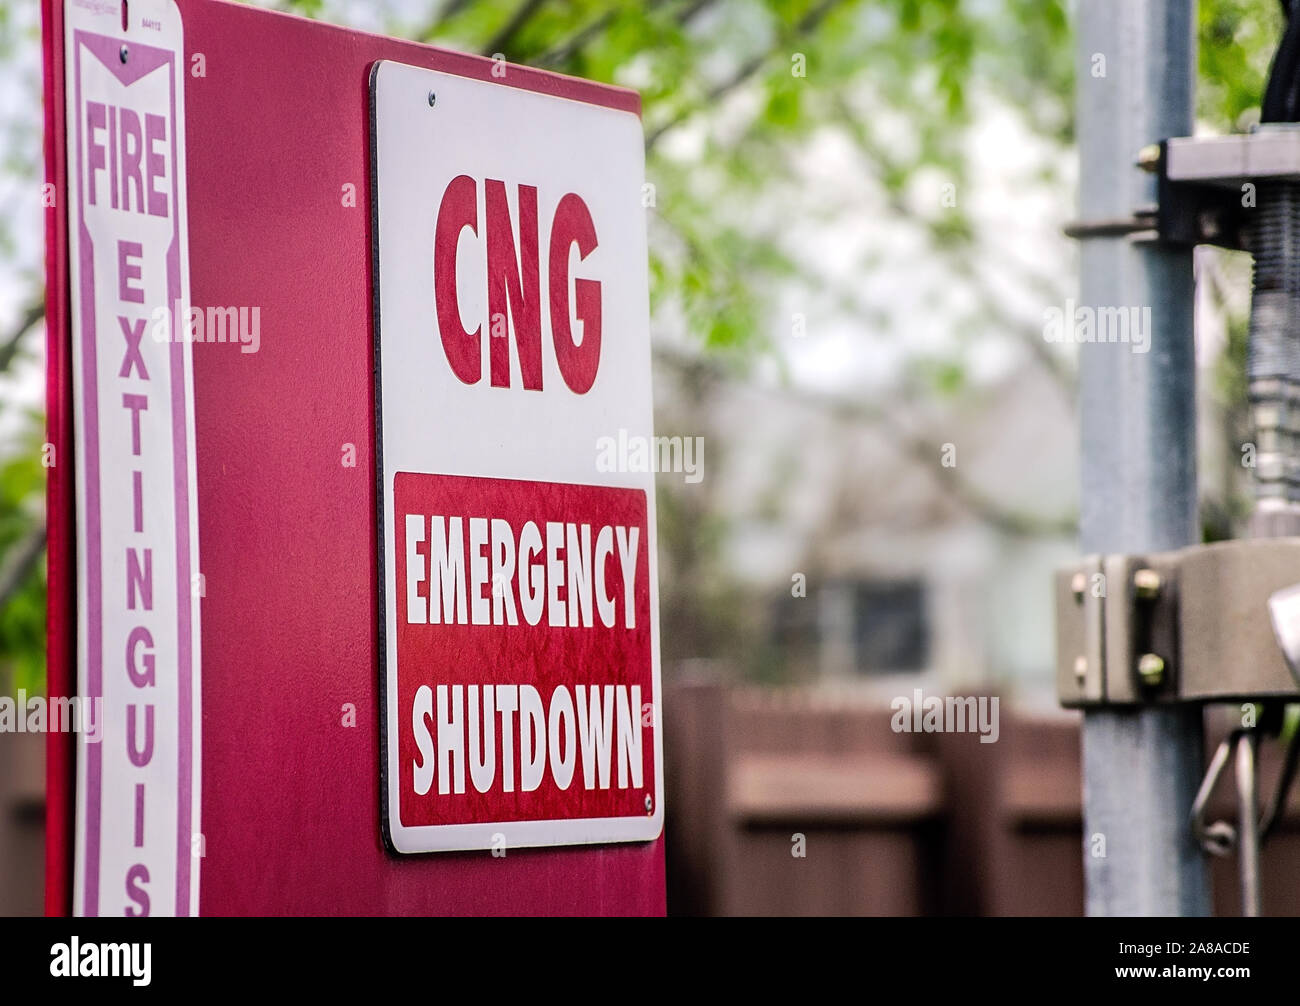 A CNG (compressed natural gas) emergency shutdown sign is pictured at Waste Pro’s time-fill station, March 19, 2016, in Jacksonville, Florida. Stock Photo